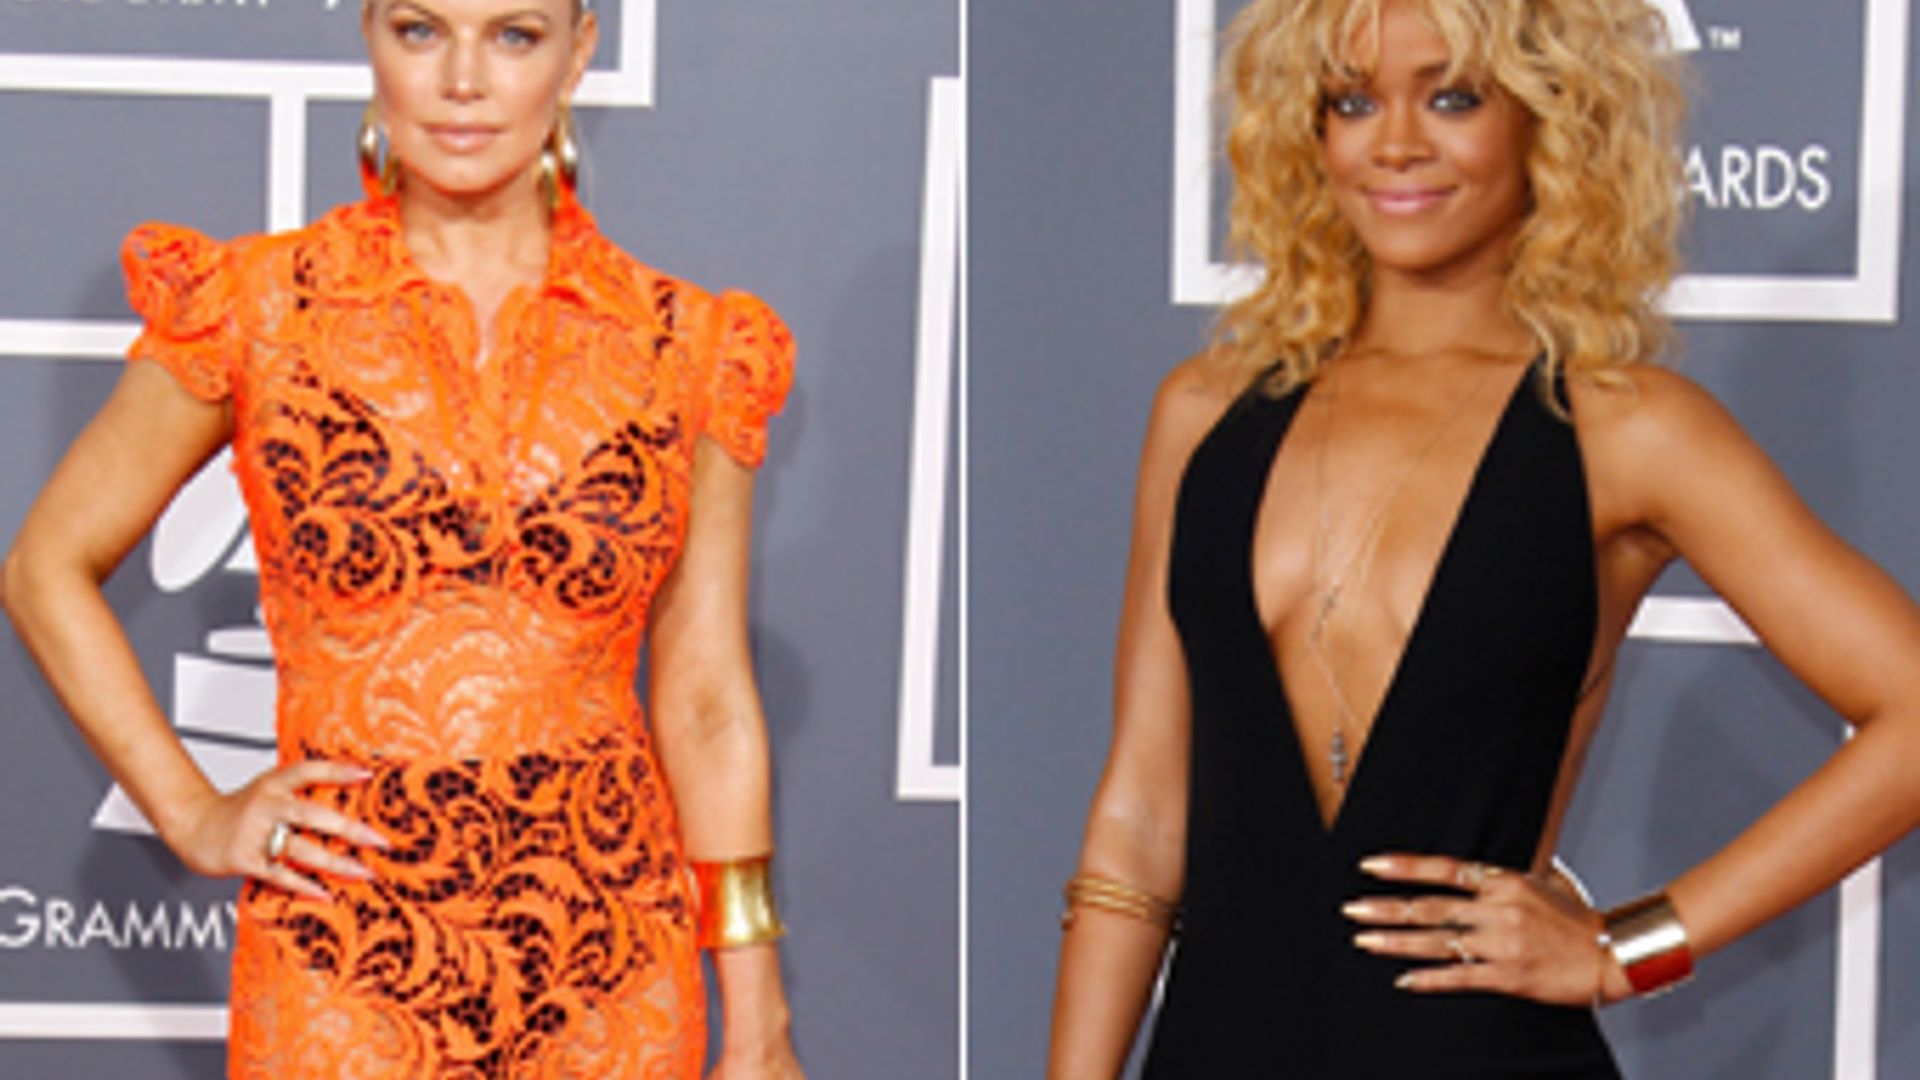 The Grammy Awards' most memorable dresses